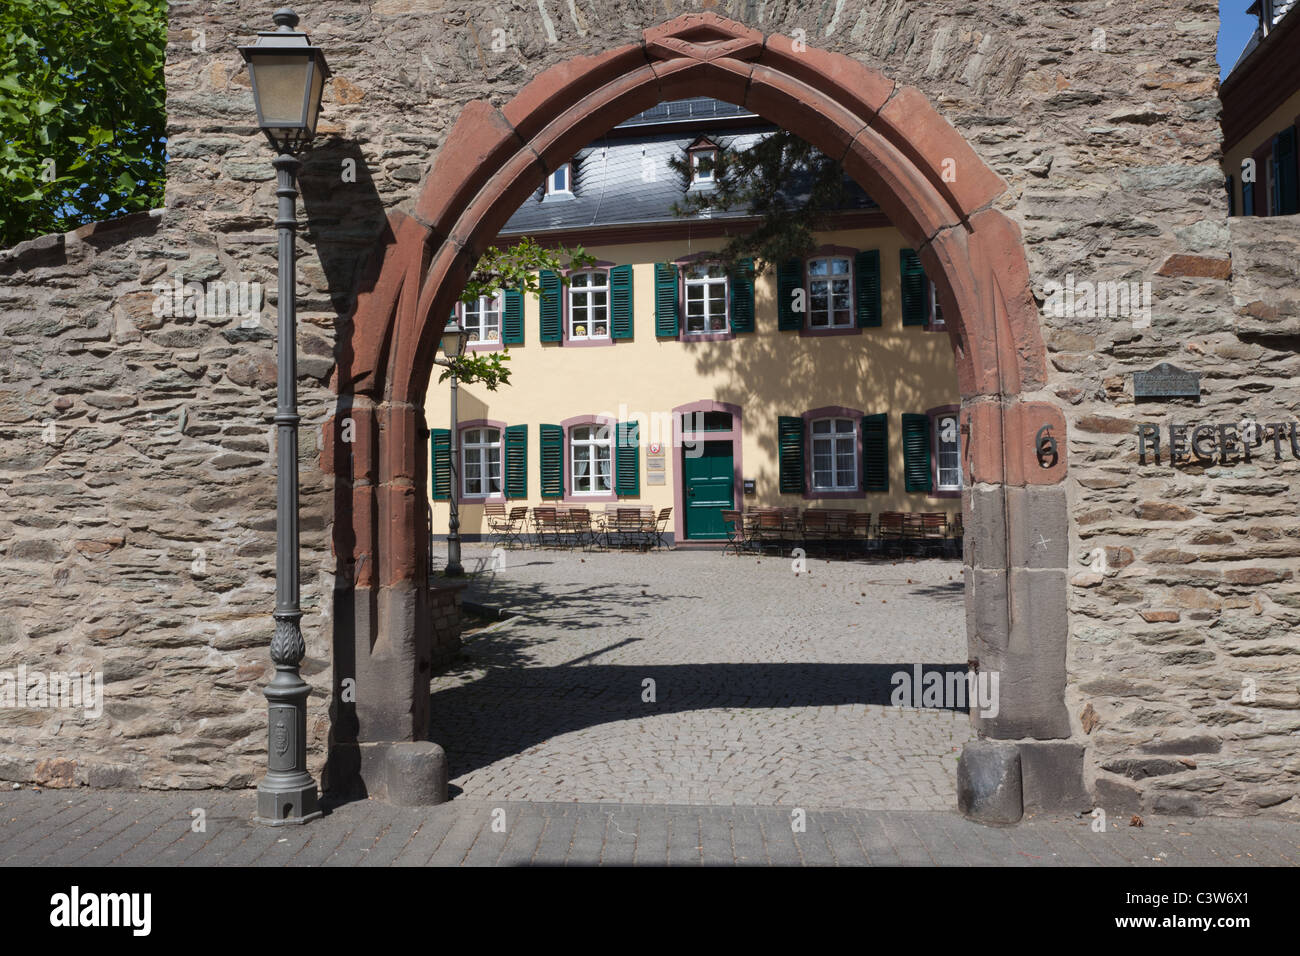 Historical architecture in Kronberg, Germany, a town within Frankfurt's commuter belt. Stock Photo